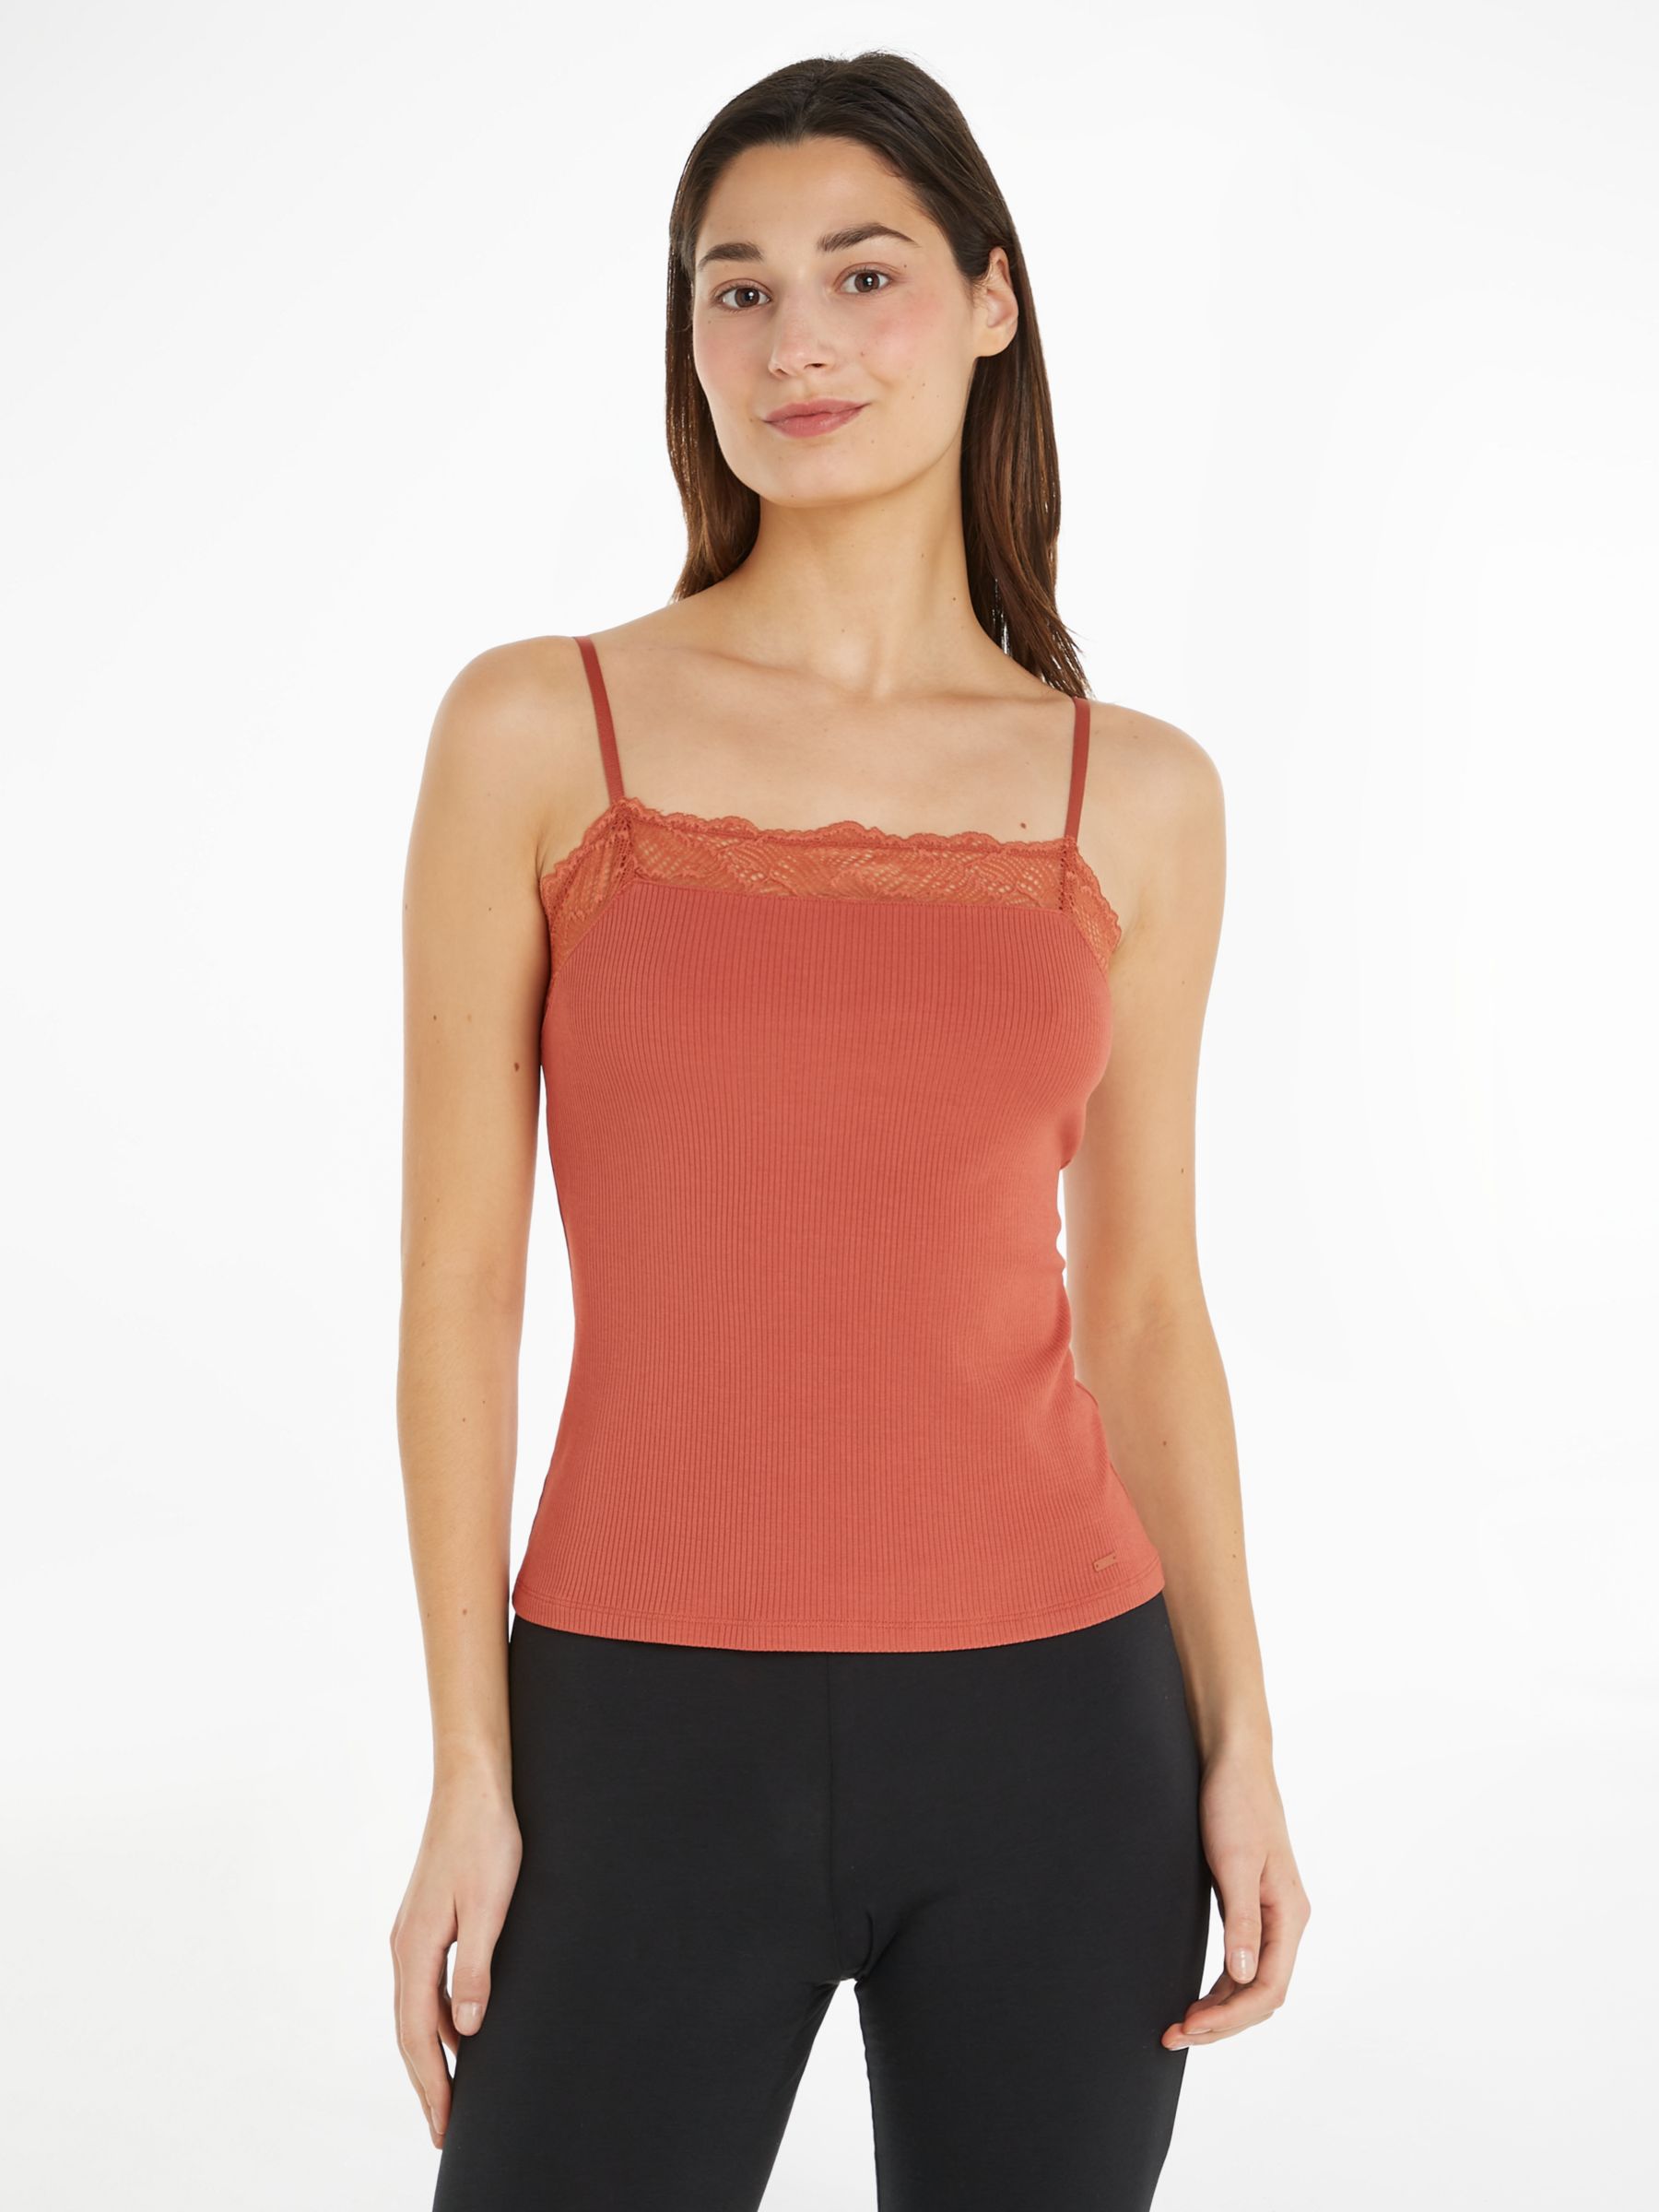 Calvin Klein Sophisticated Lounge Cami Top, Copper, XS